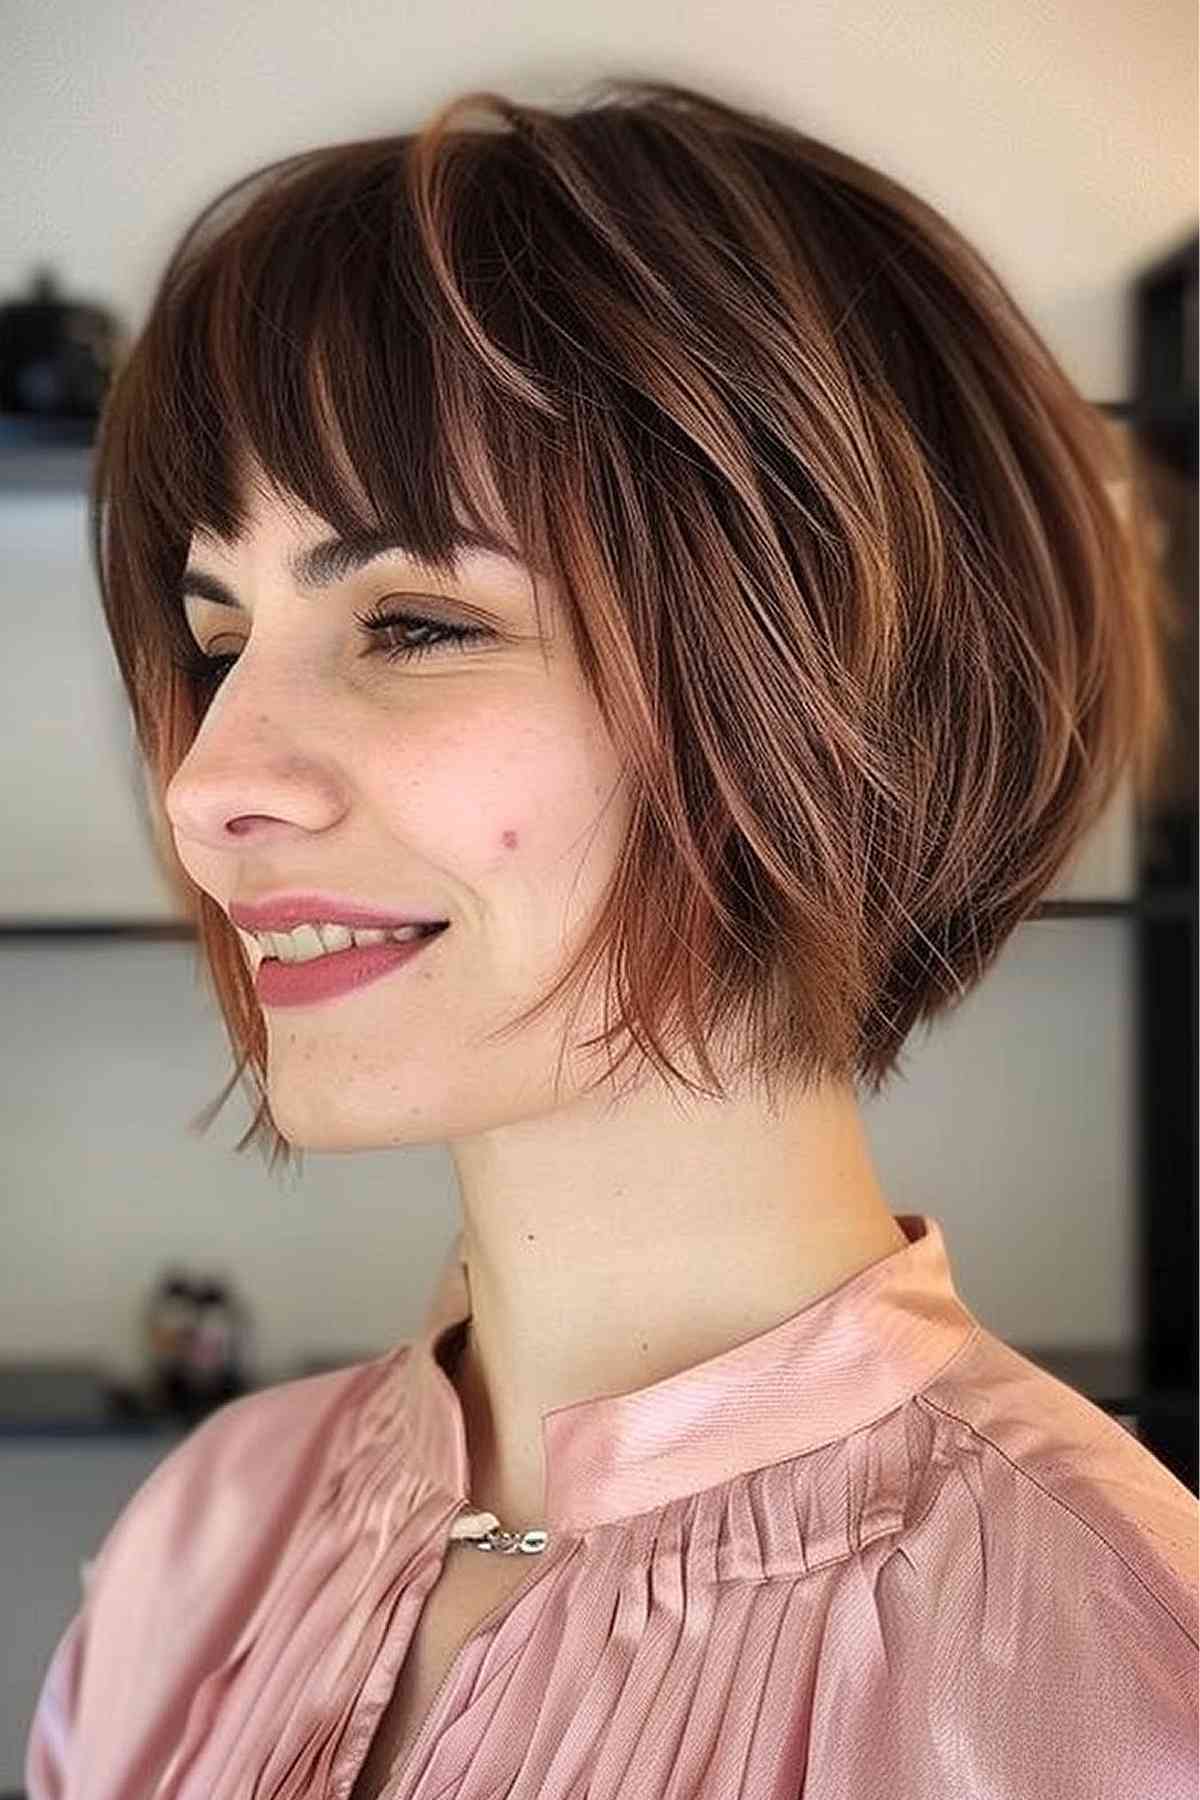 Chanel bob haircut with disconnected layers at the back for added volume